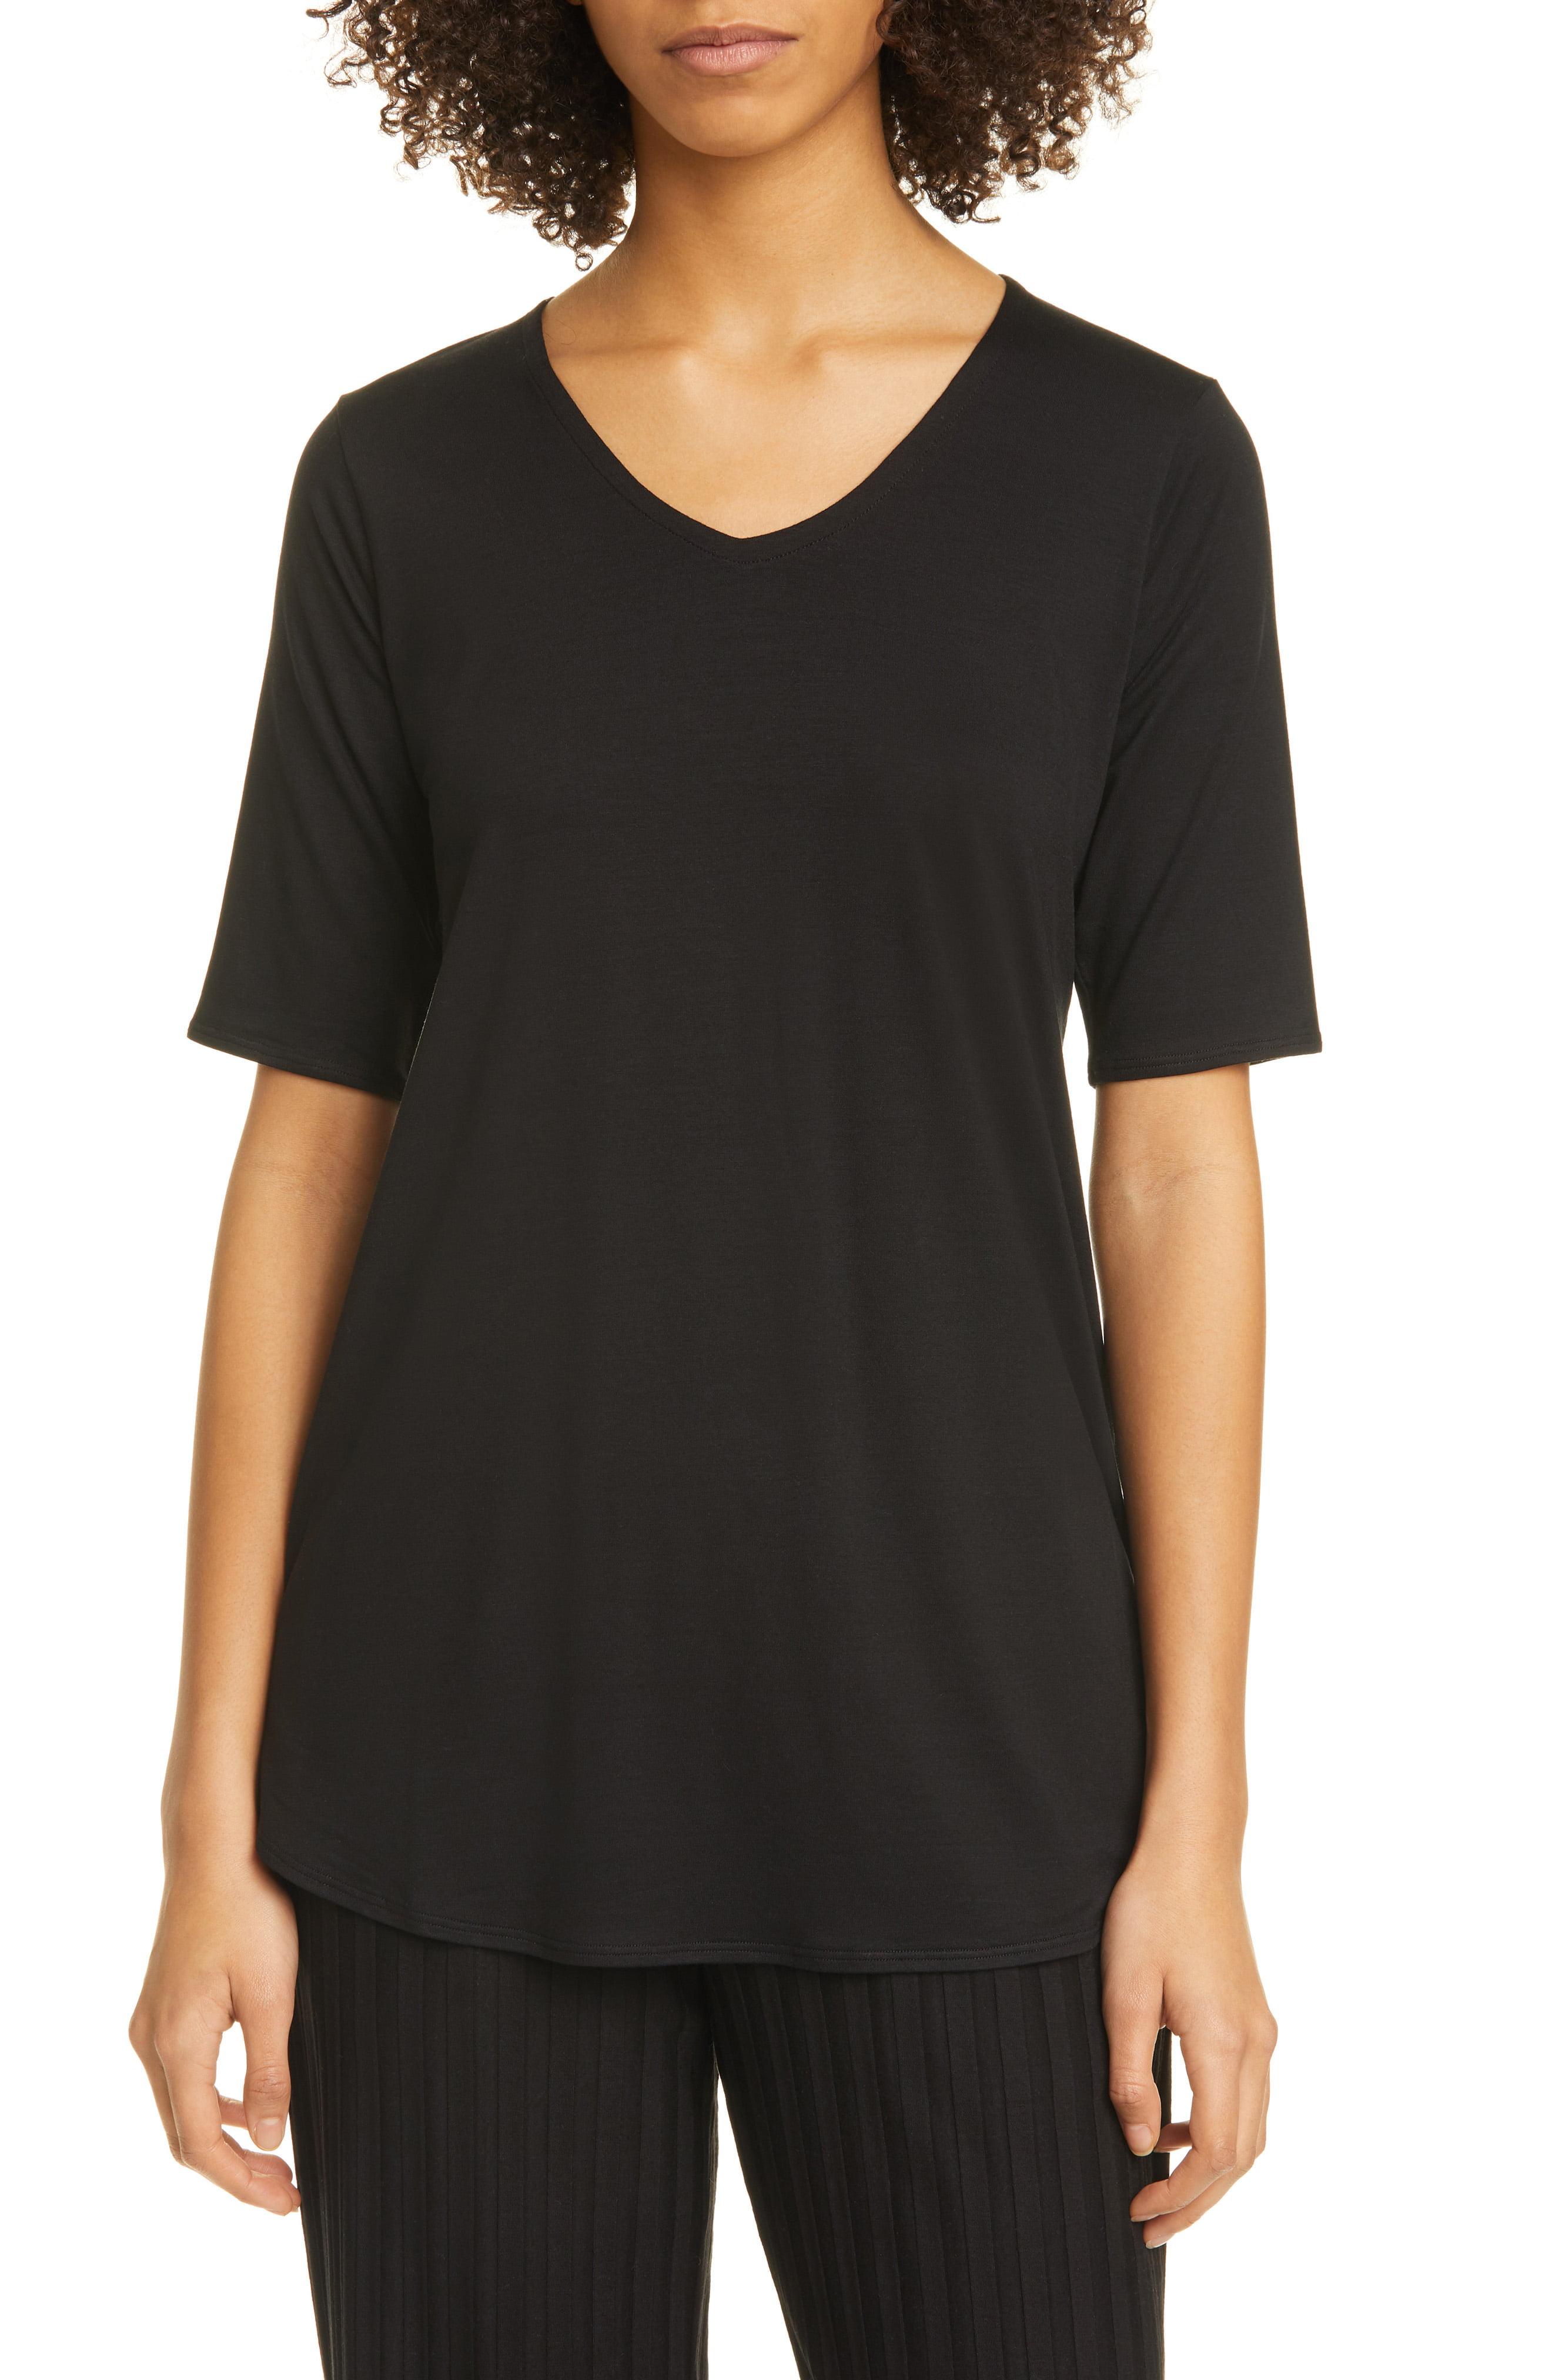 Eileen Fisher V-neck Tunic Top in Black - Save 21% - Lyst